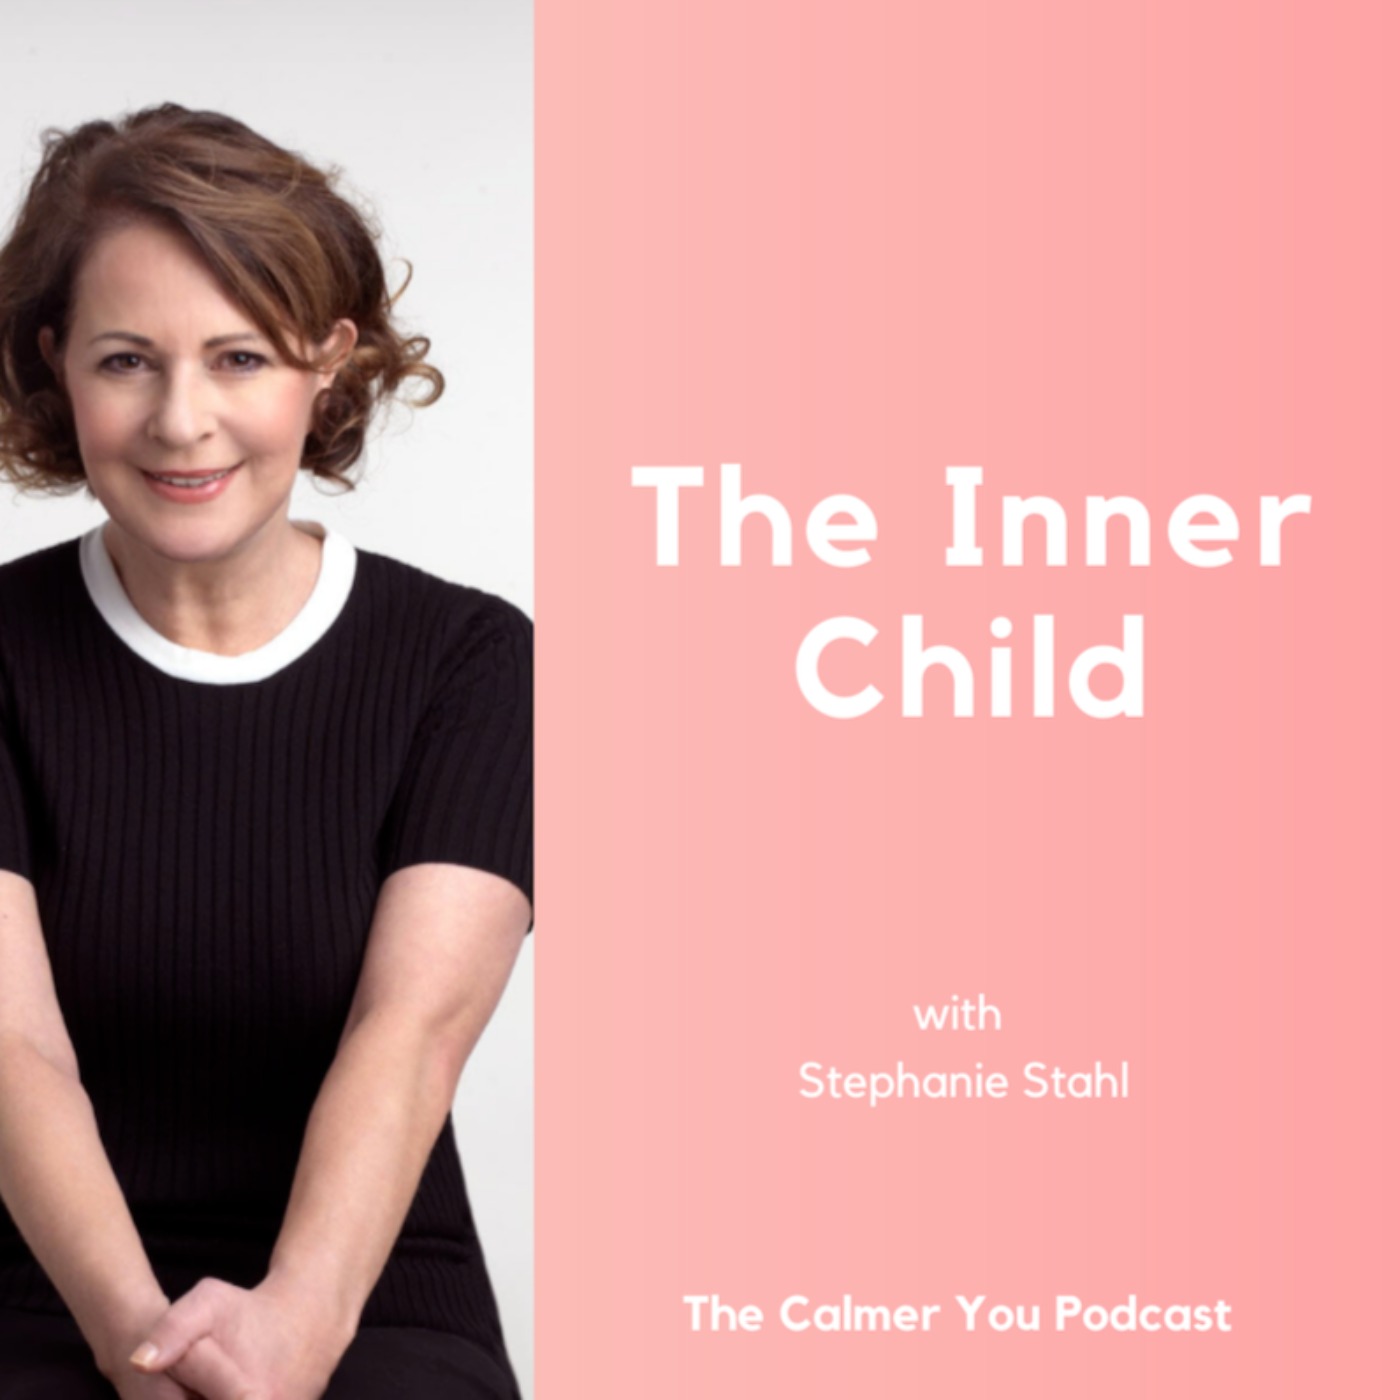 Ep 150 The inner child with Stefanie Stahl